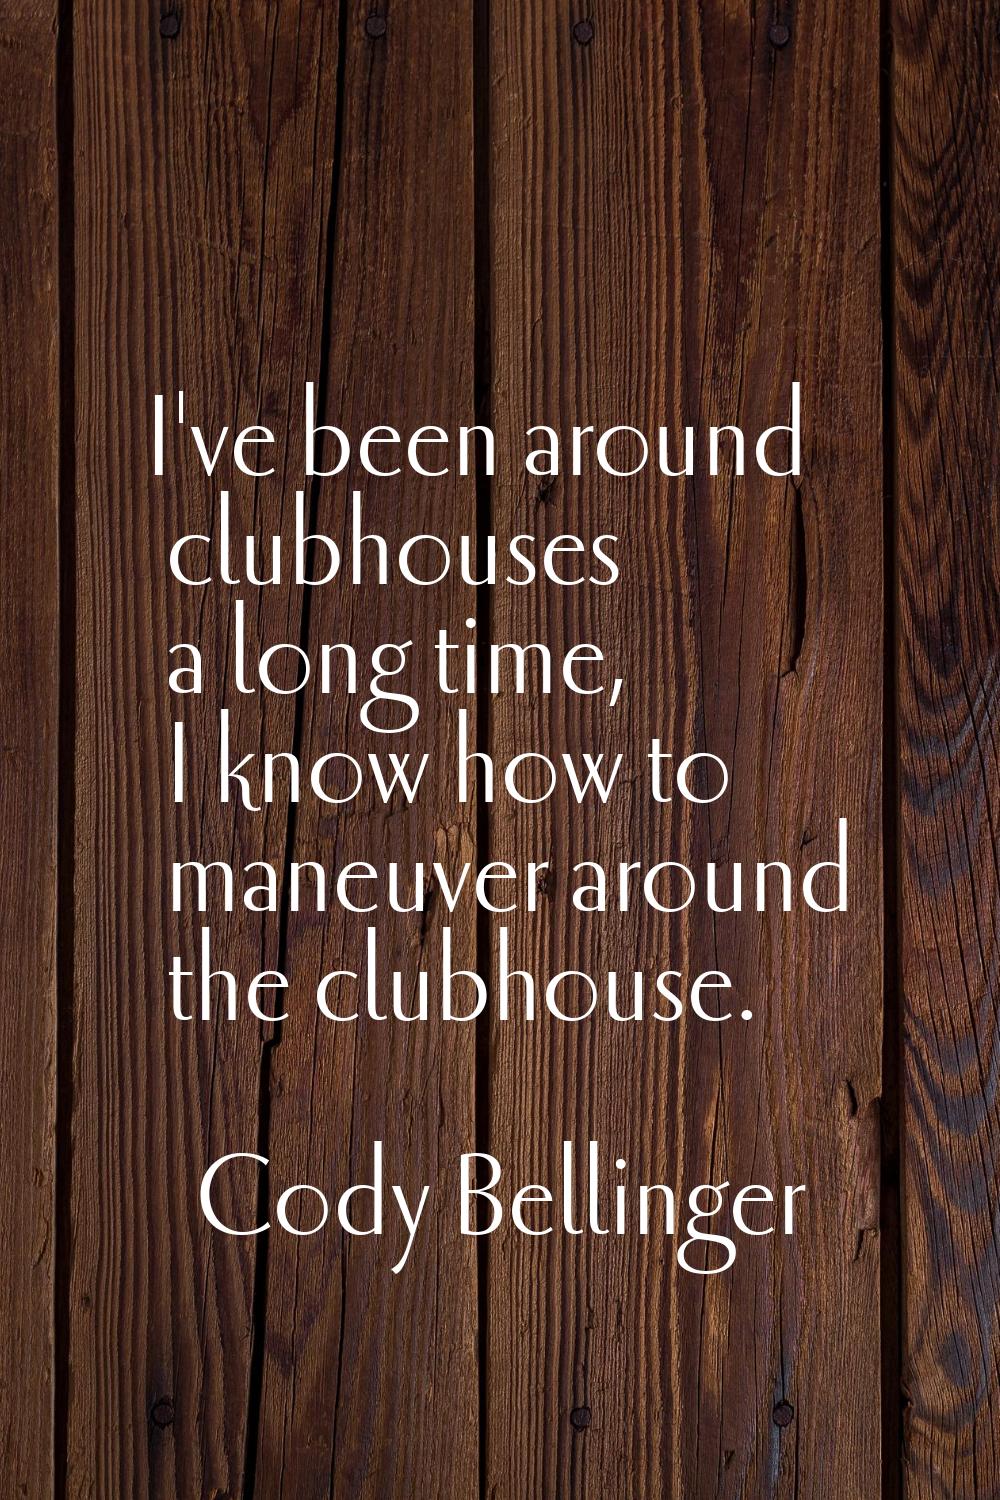 I've been around clubhouses a long time, I know how to maneuver around the clubhouse.